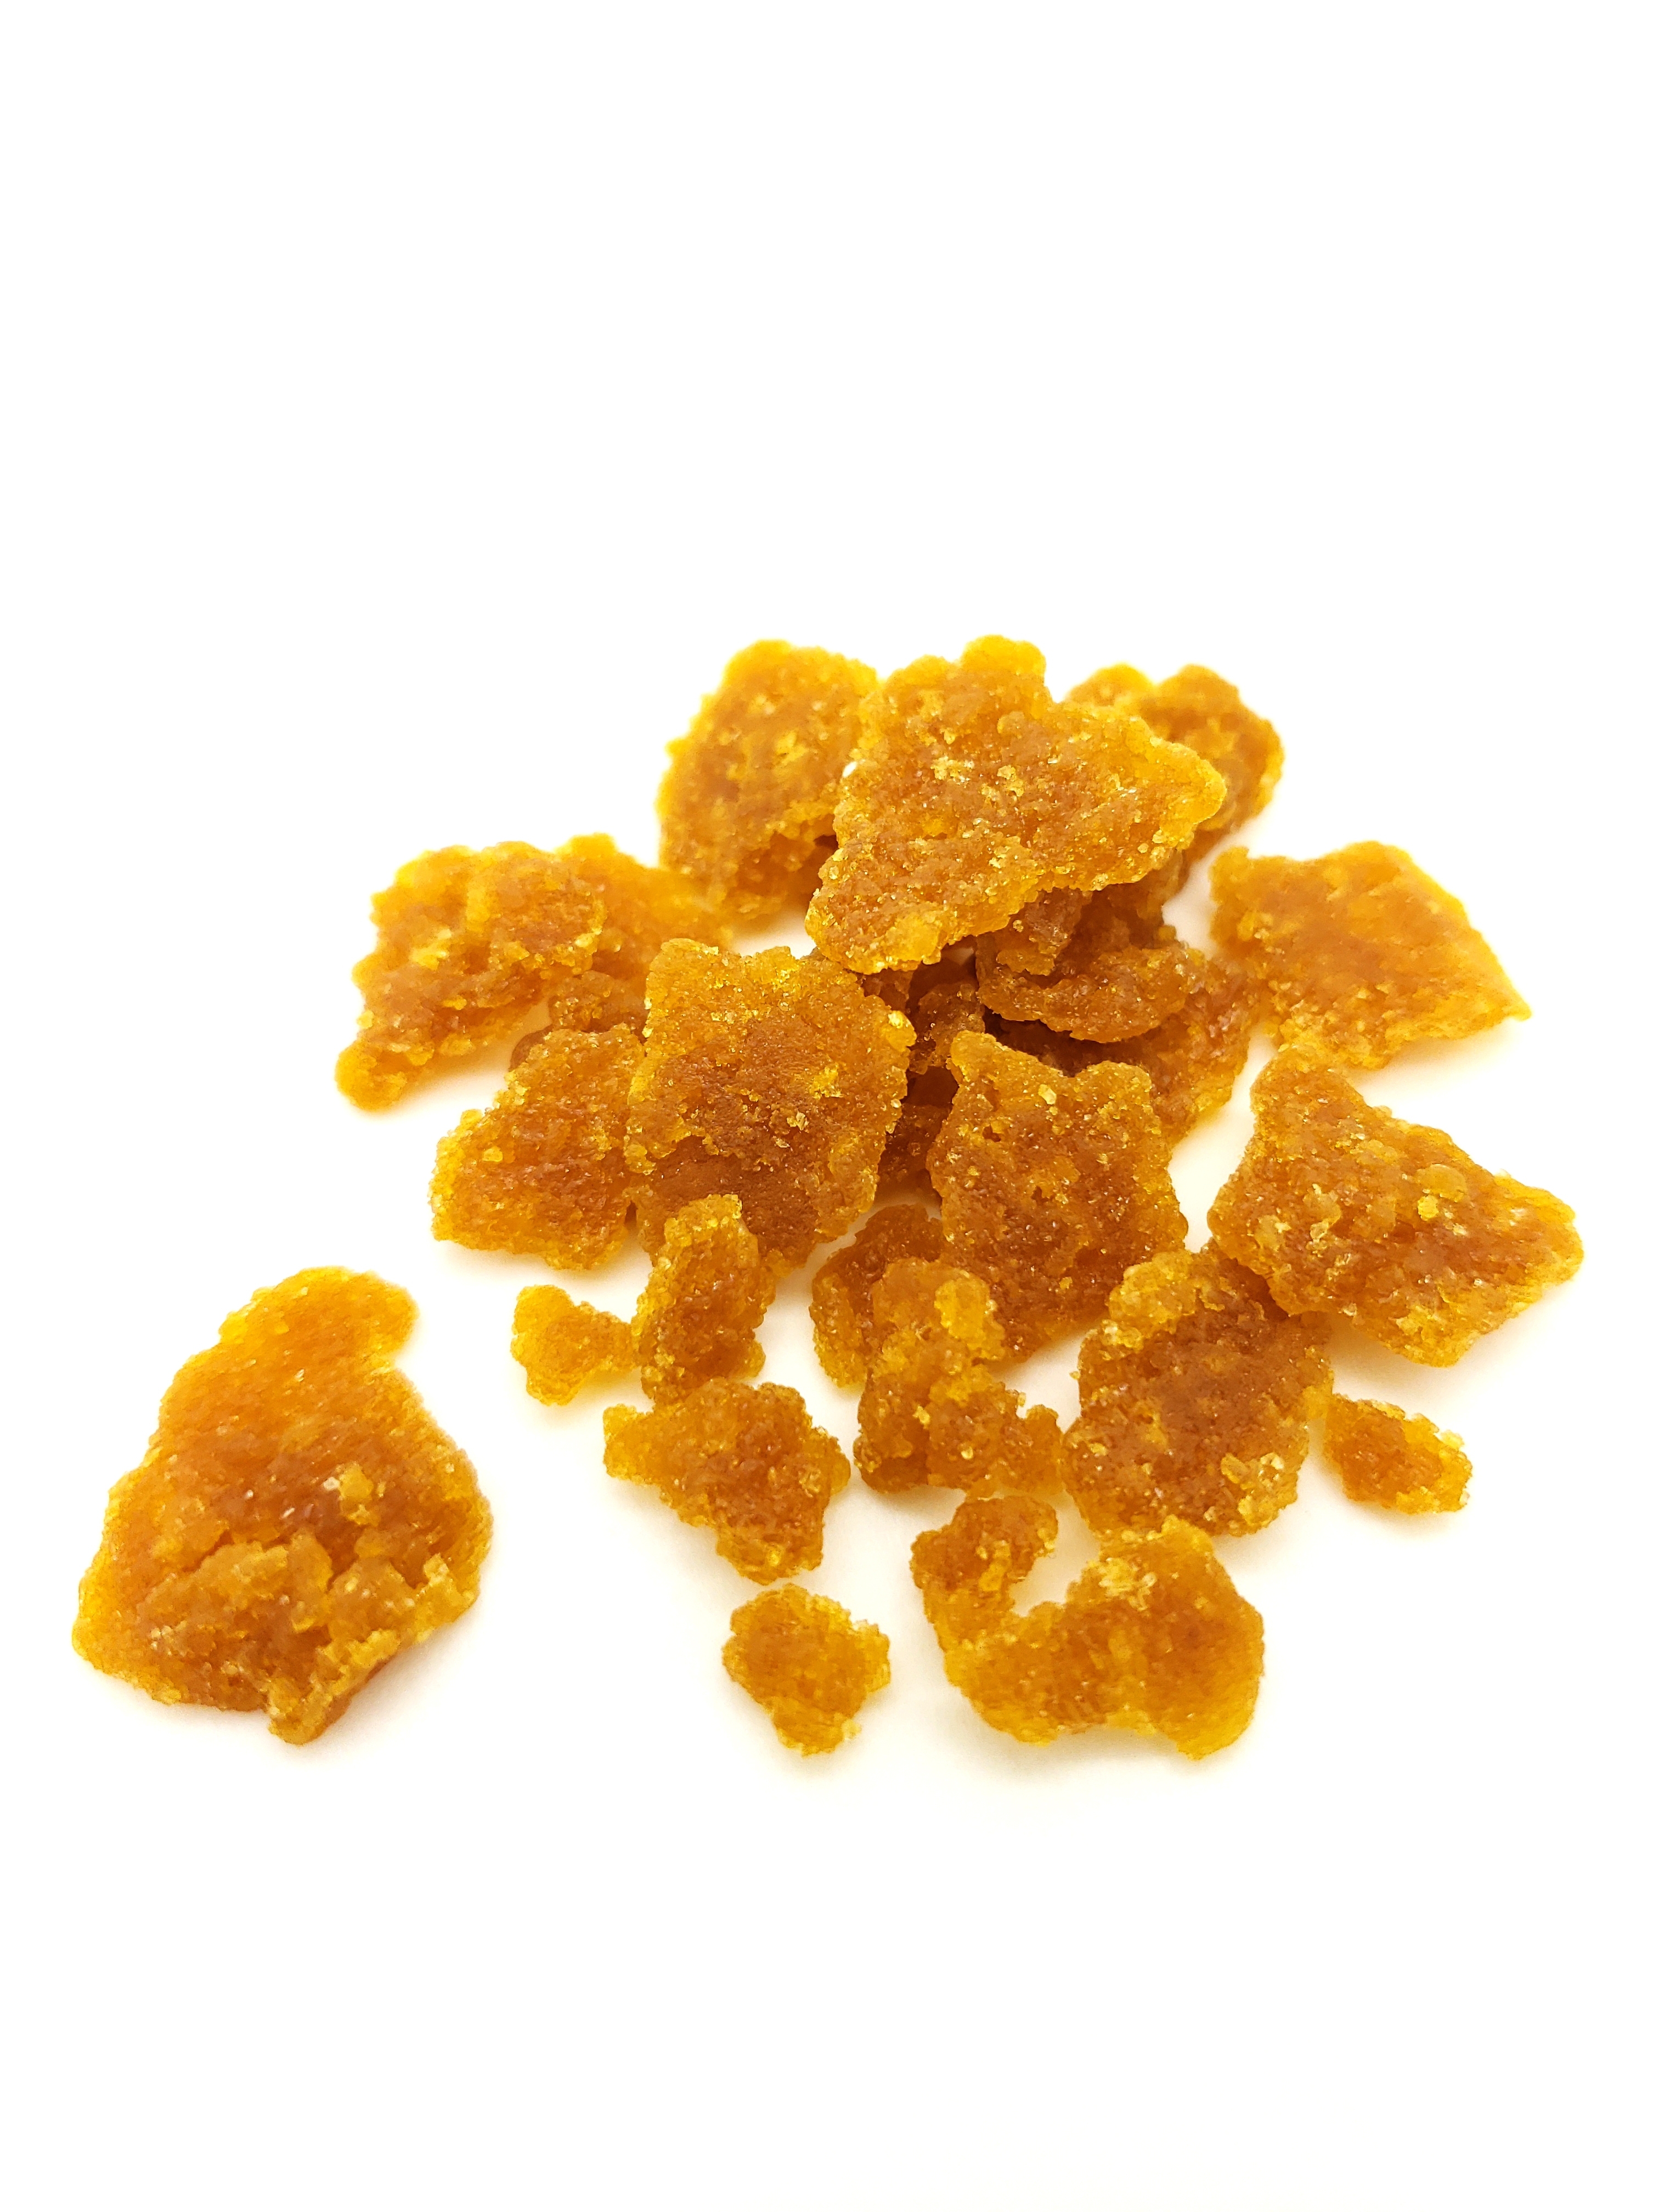 Live Resin for review of THCCollection